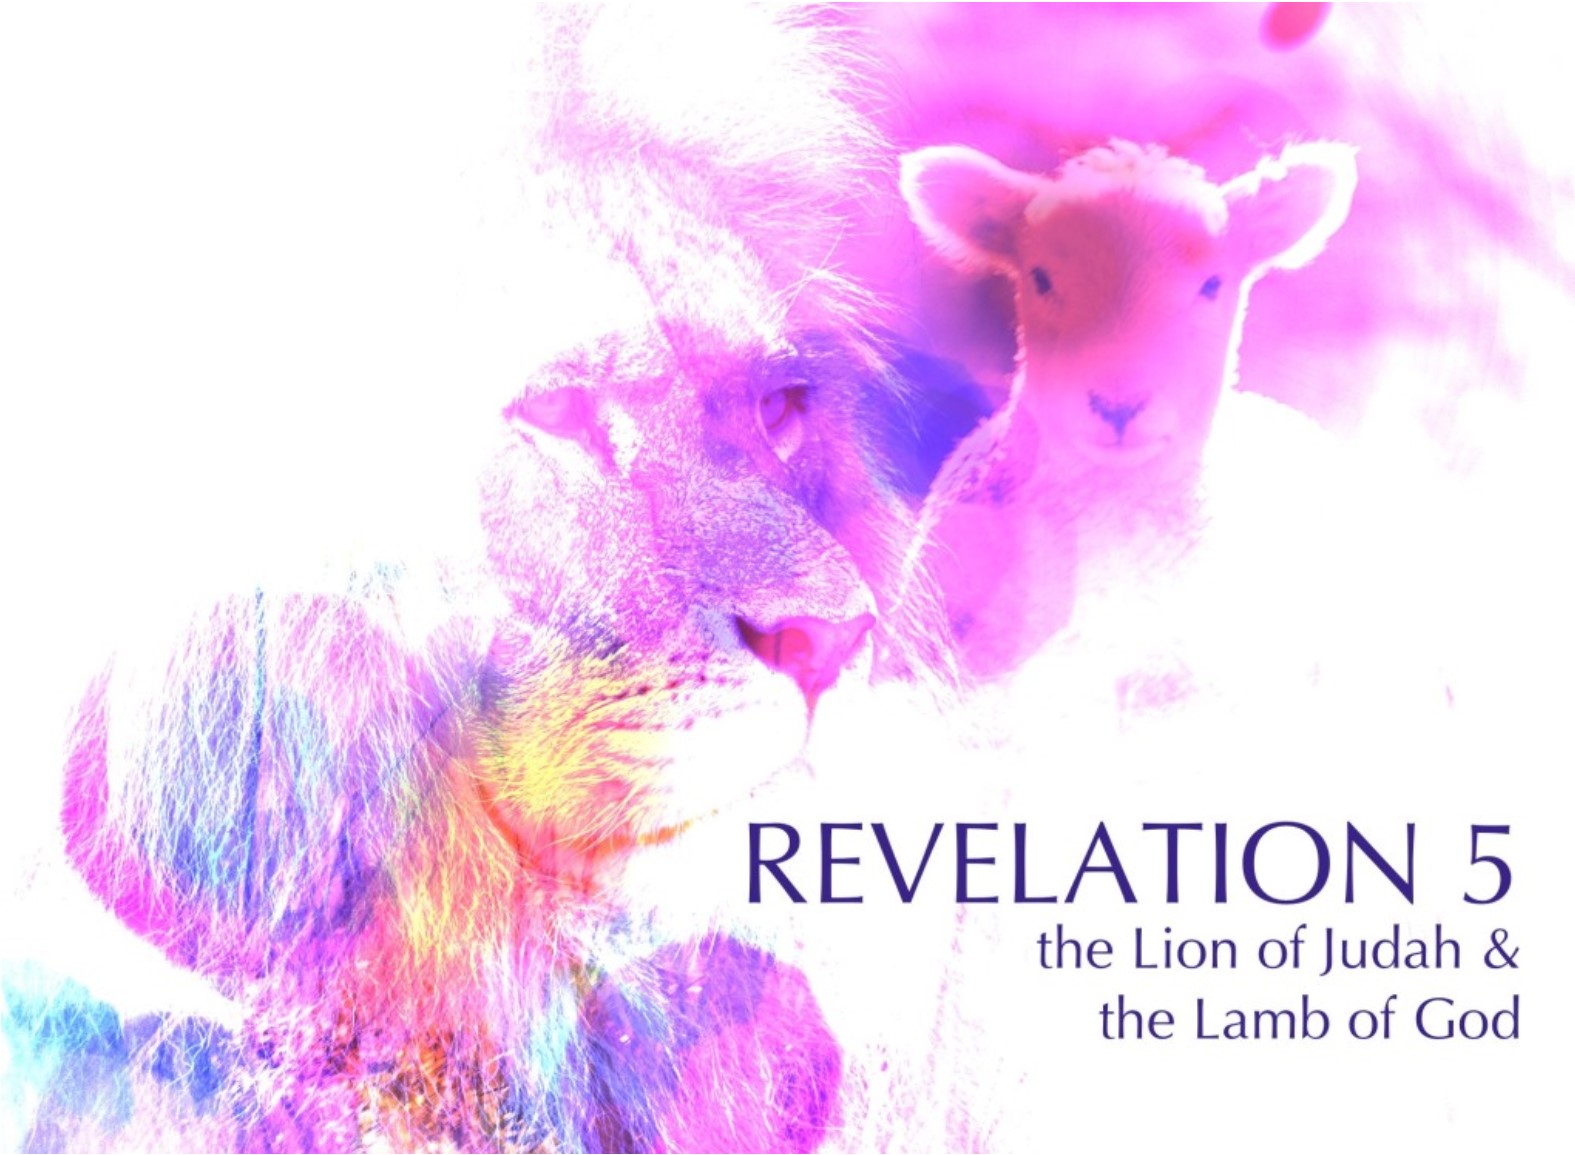 are behold the lamb publications a cult